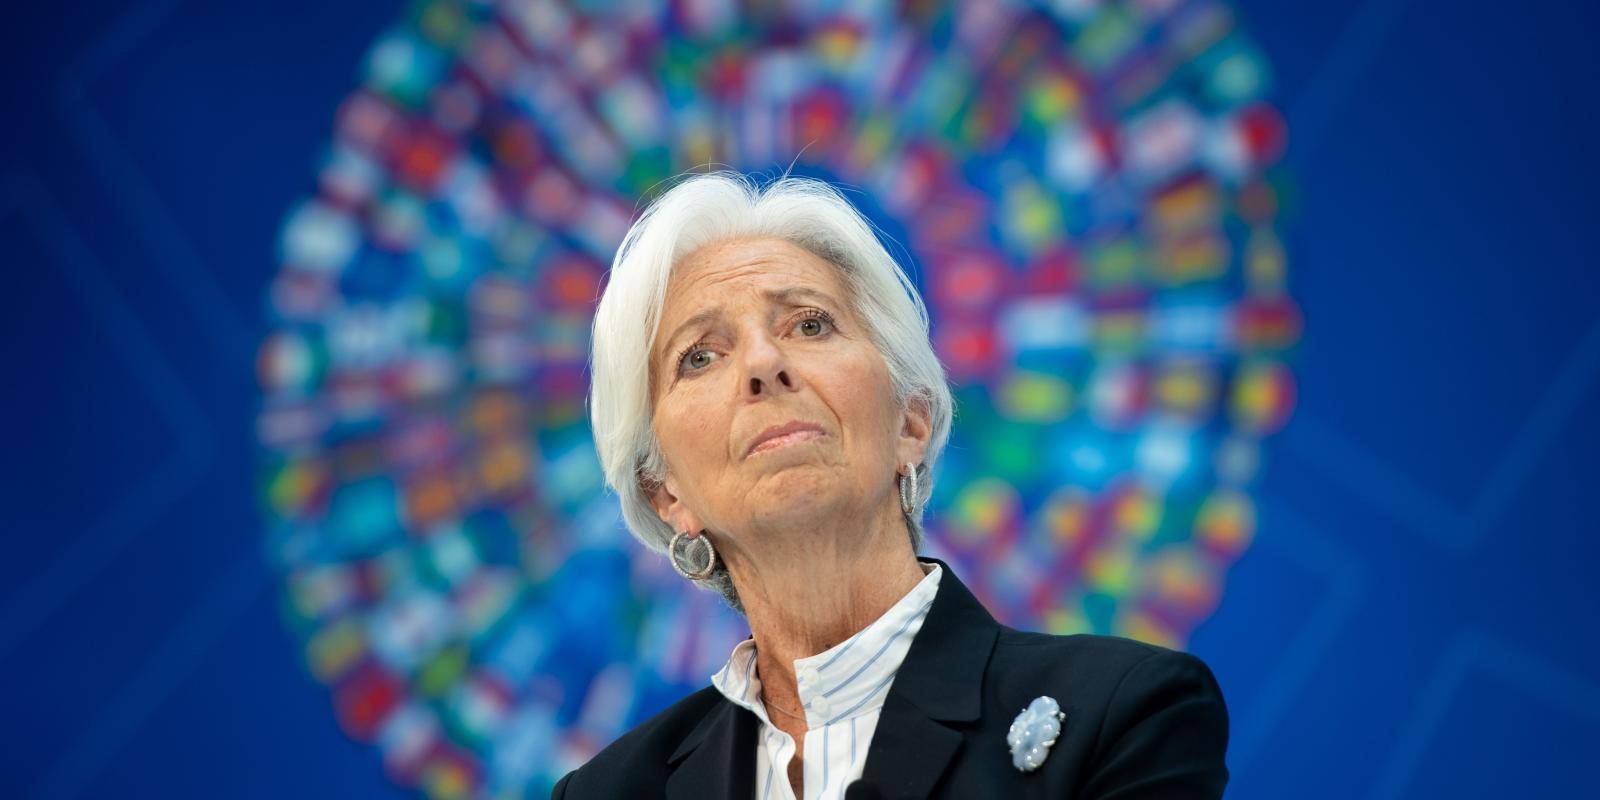 lagarde on cryptocurrency